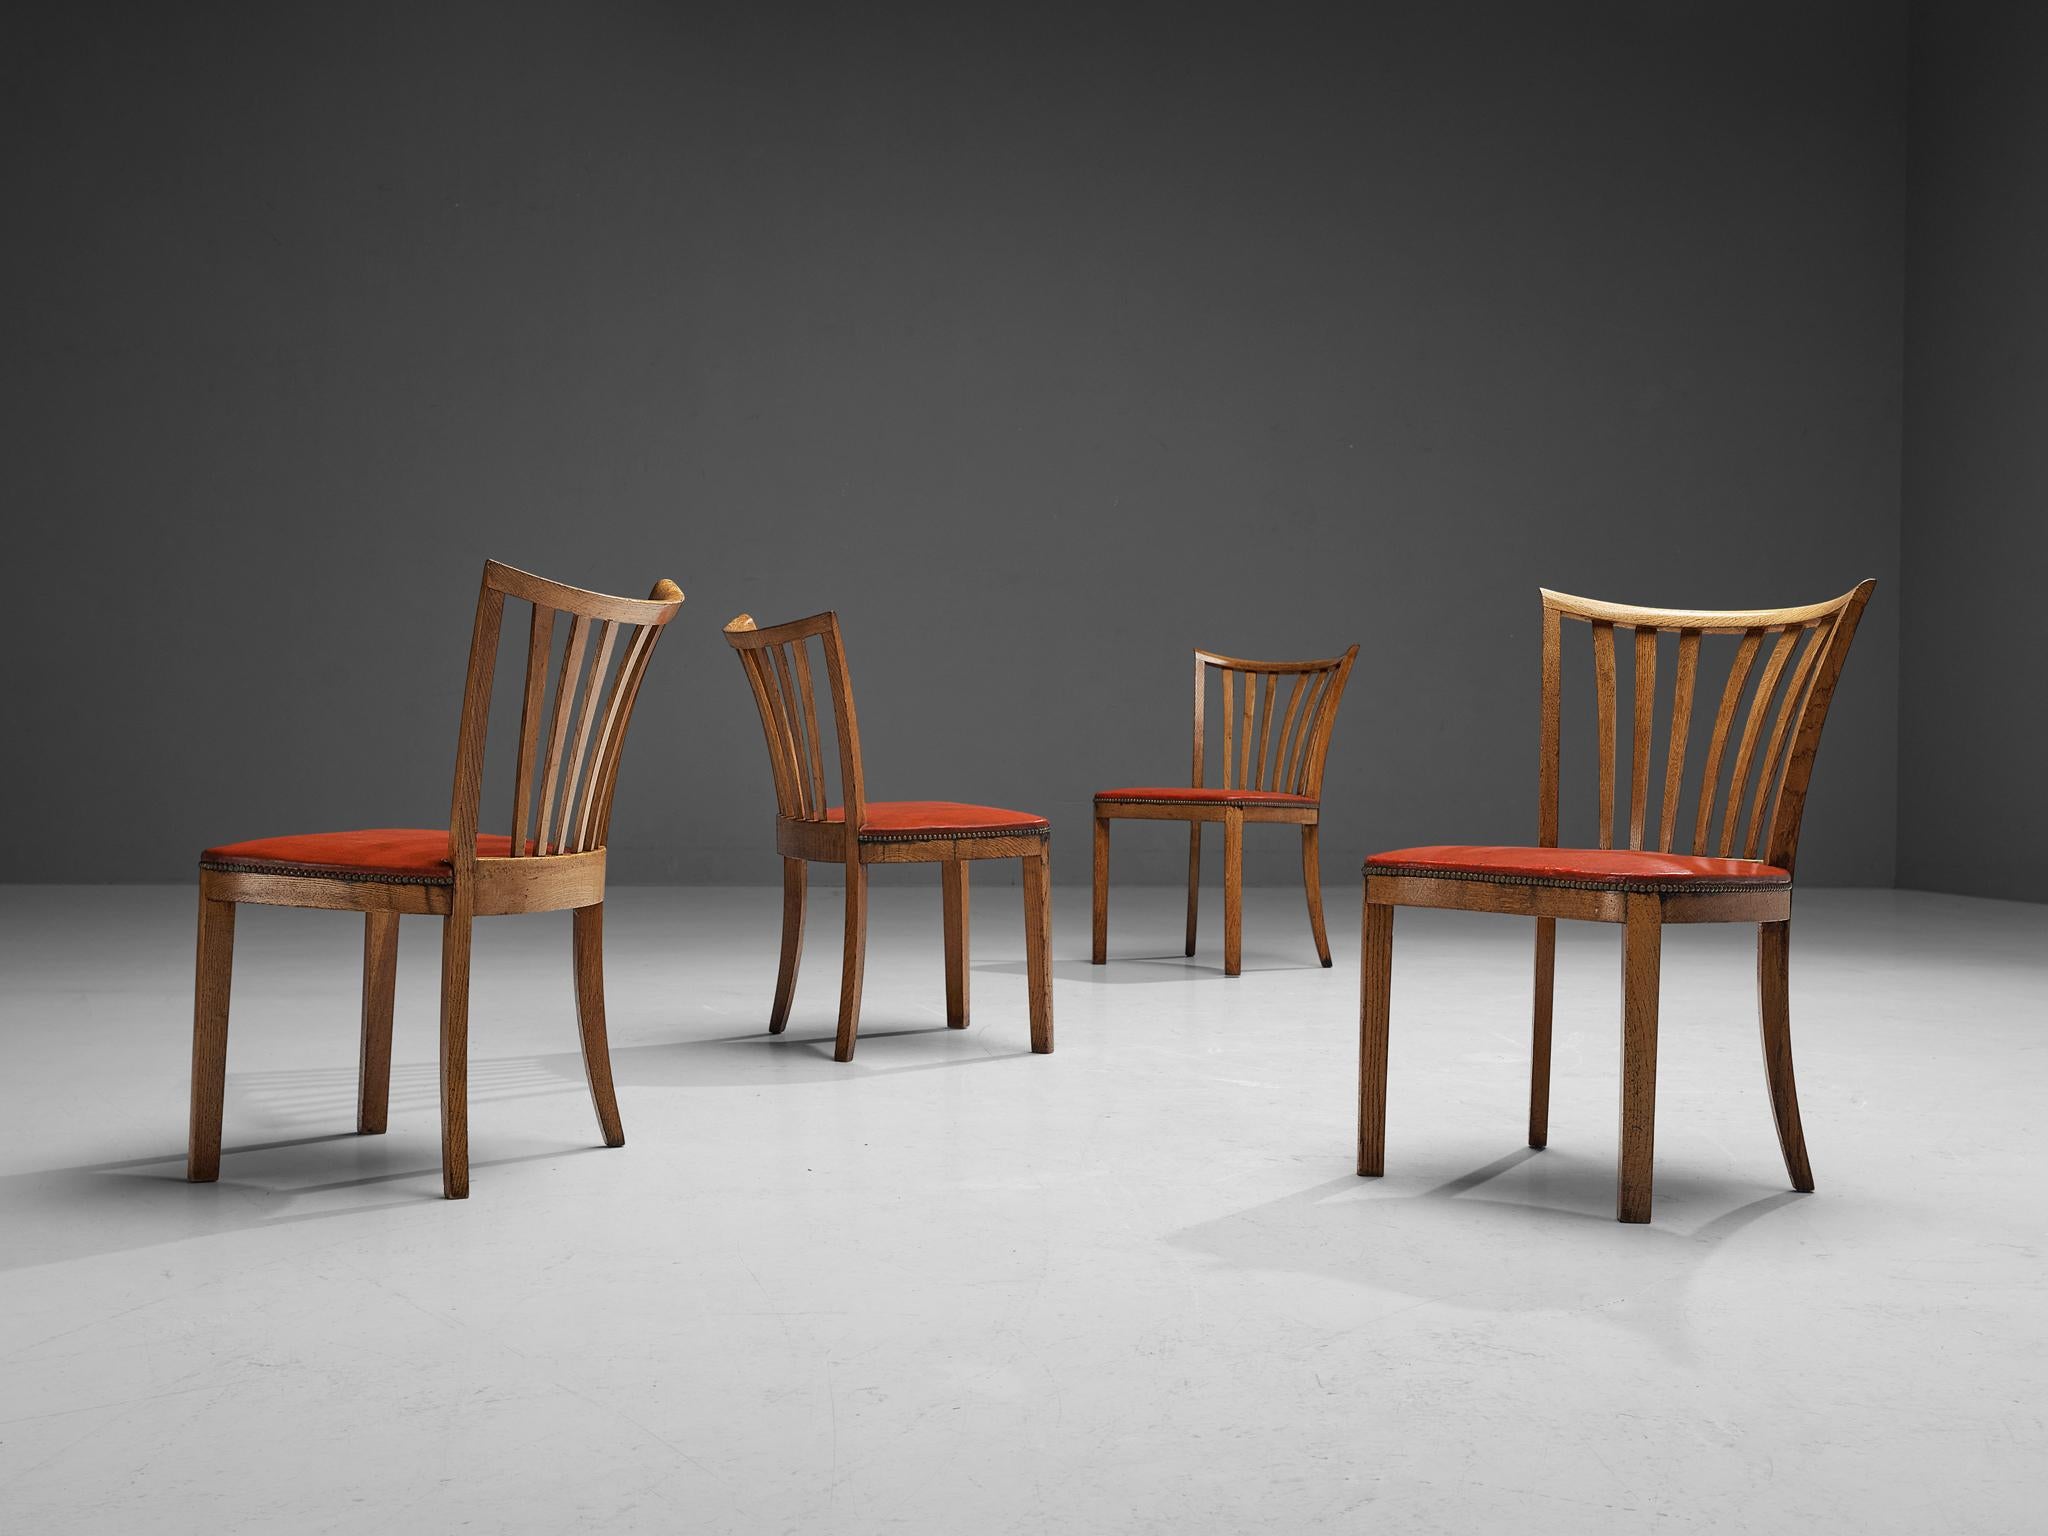 Set of four dining chairs, leatherette, oak, brass, France, 1940s 

The strong, elegant form of the geometrical backrest with spindles, all executed in the finest oak is absolutely striking. Lightness is created through the slim proportions of the